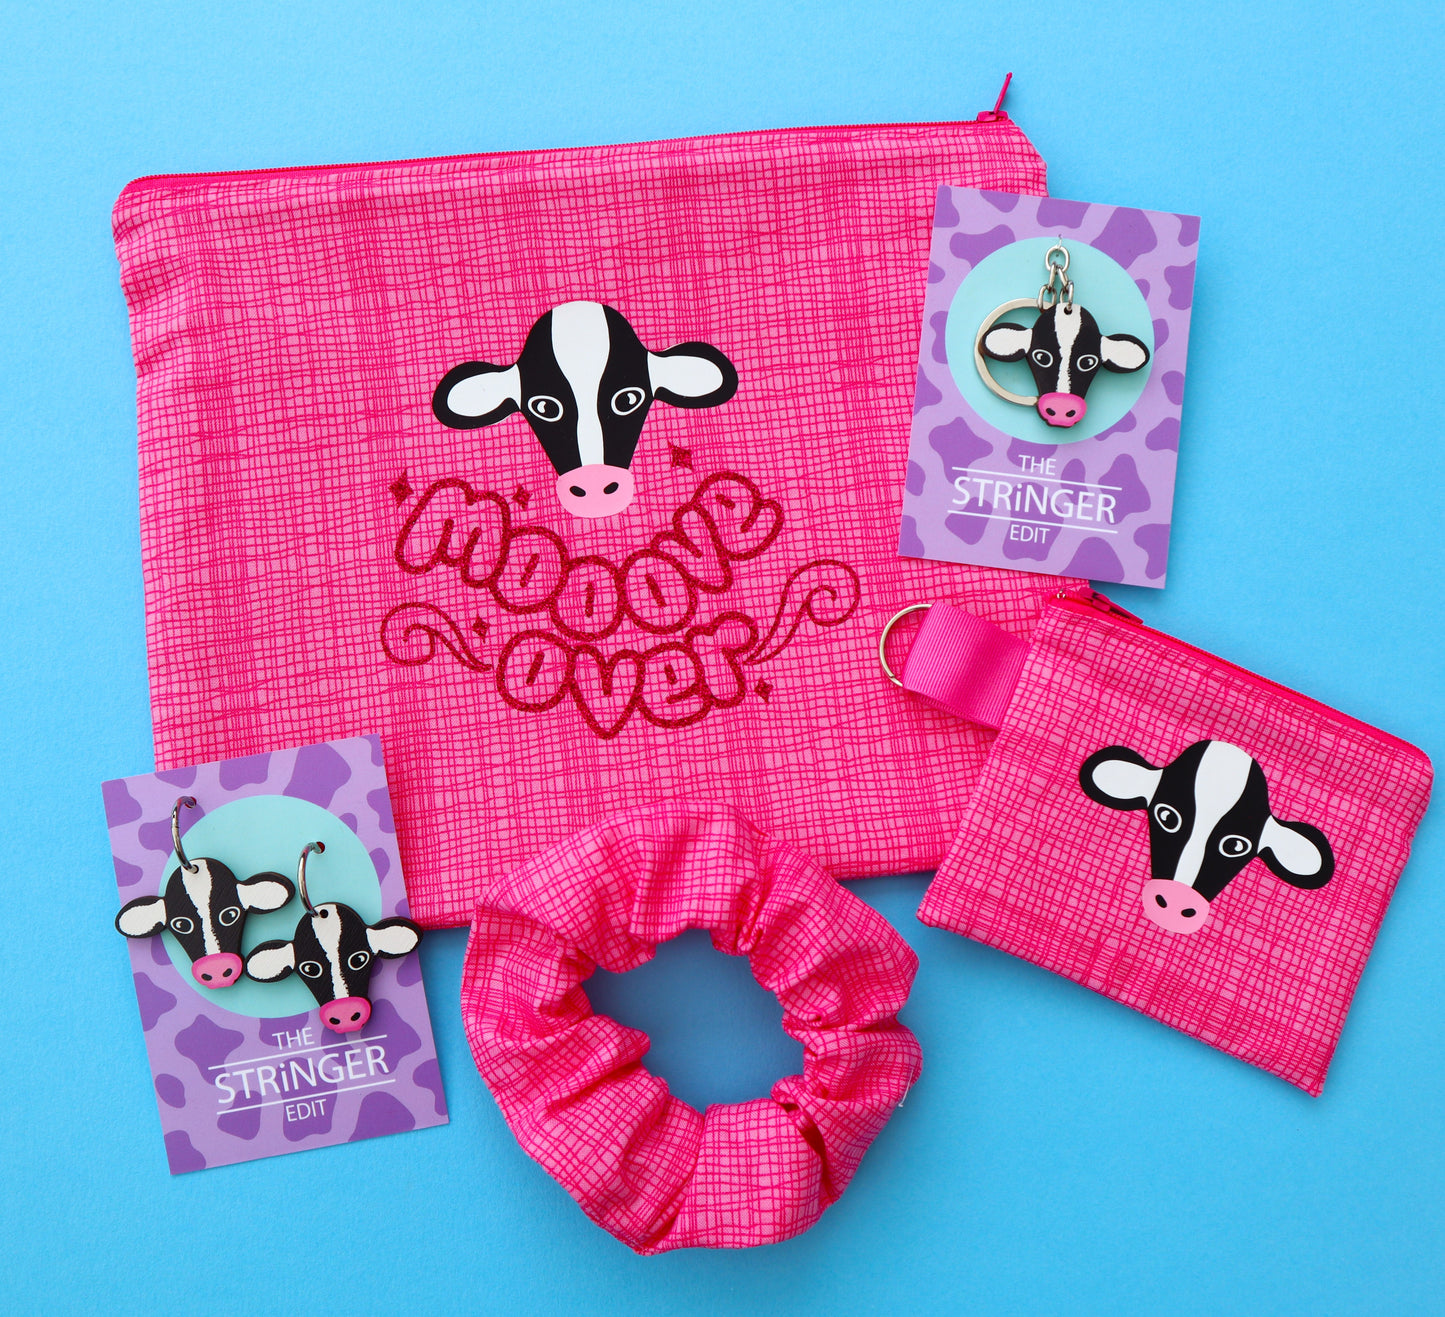 Checked Cow Print Pouch